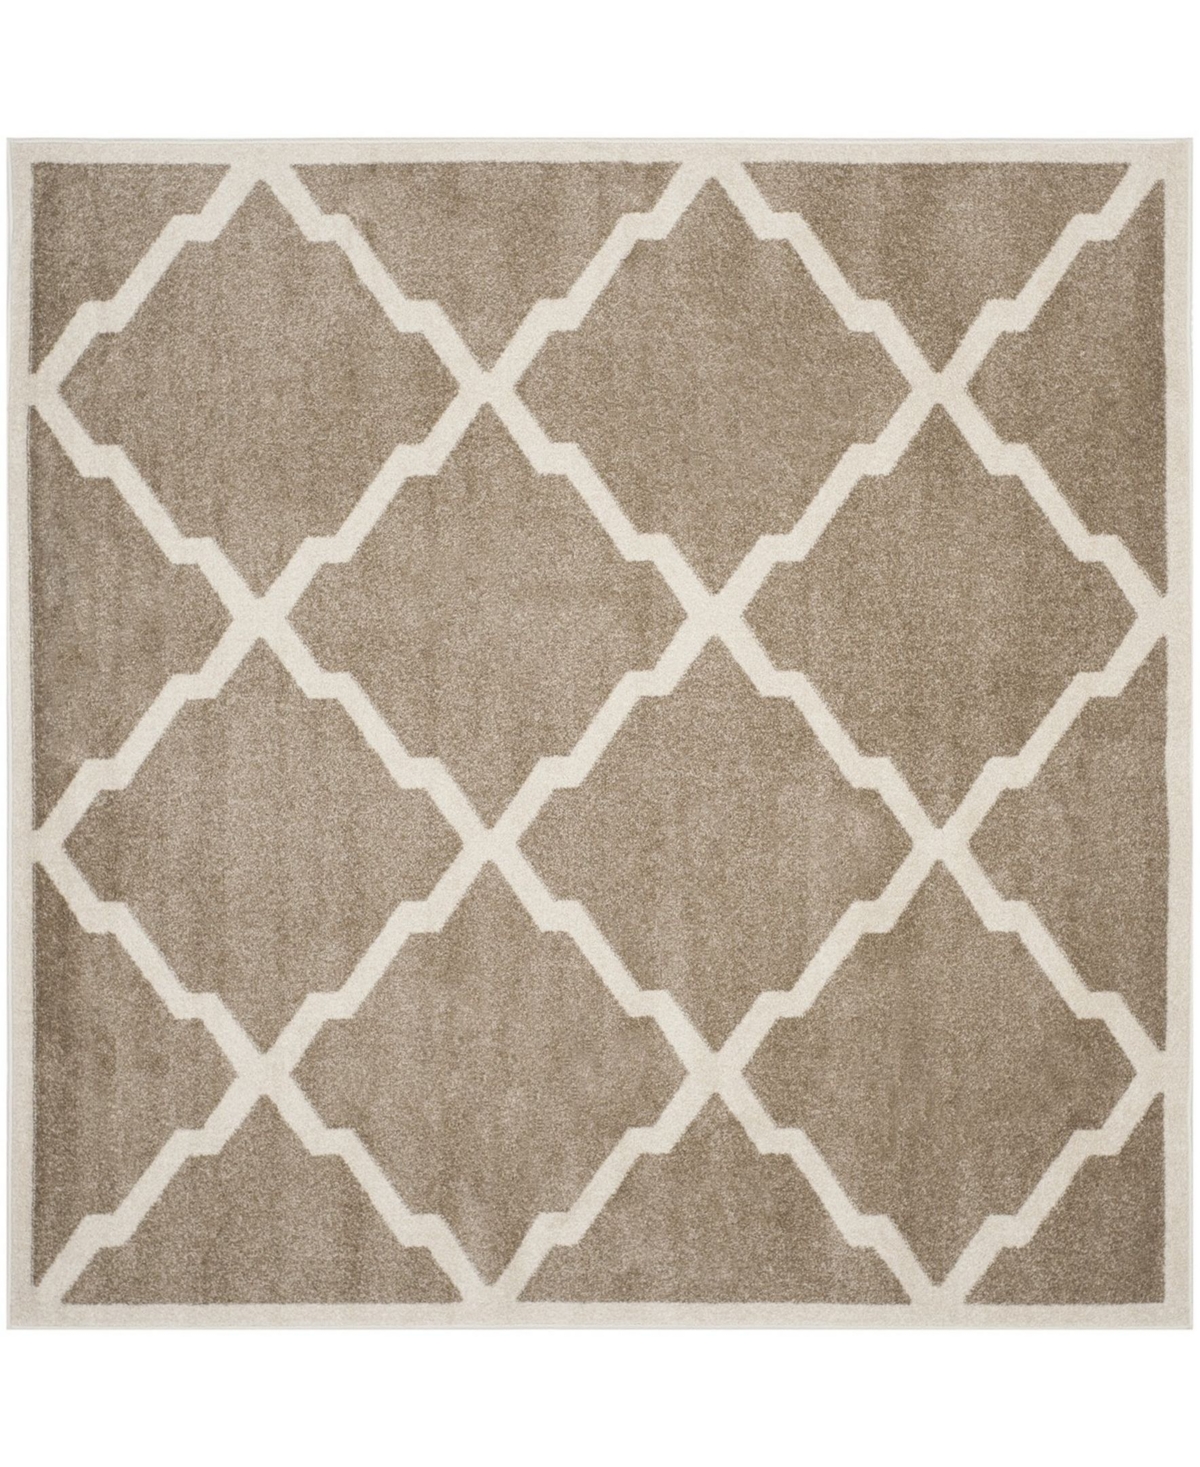 Safavieh Amherst Wheat and Beige 9' x 9' Square Area Rug - Beige